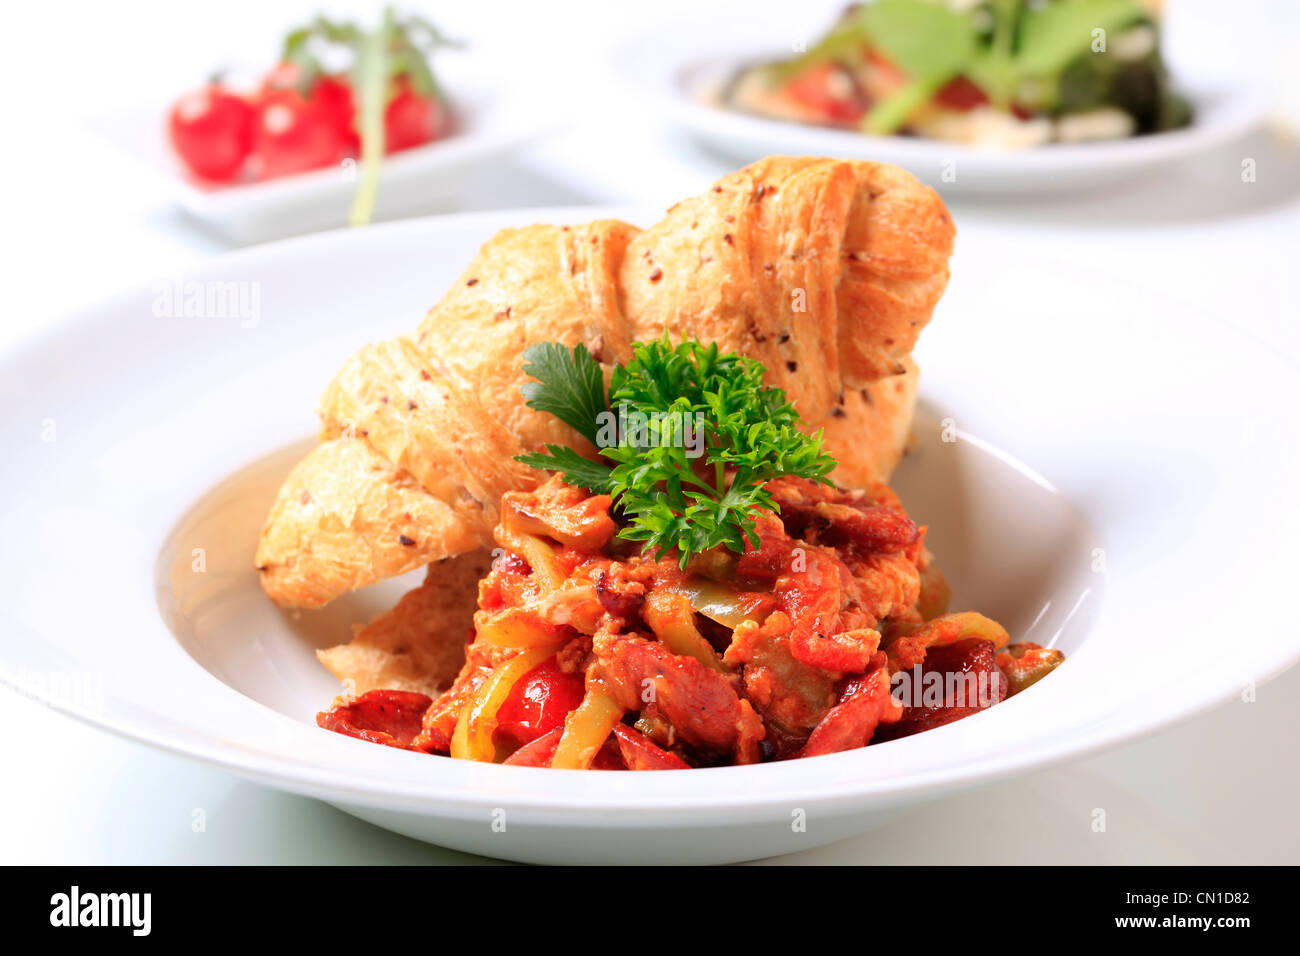 Vegetable stew with slices of sausage and bread roll Stock Photo